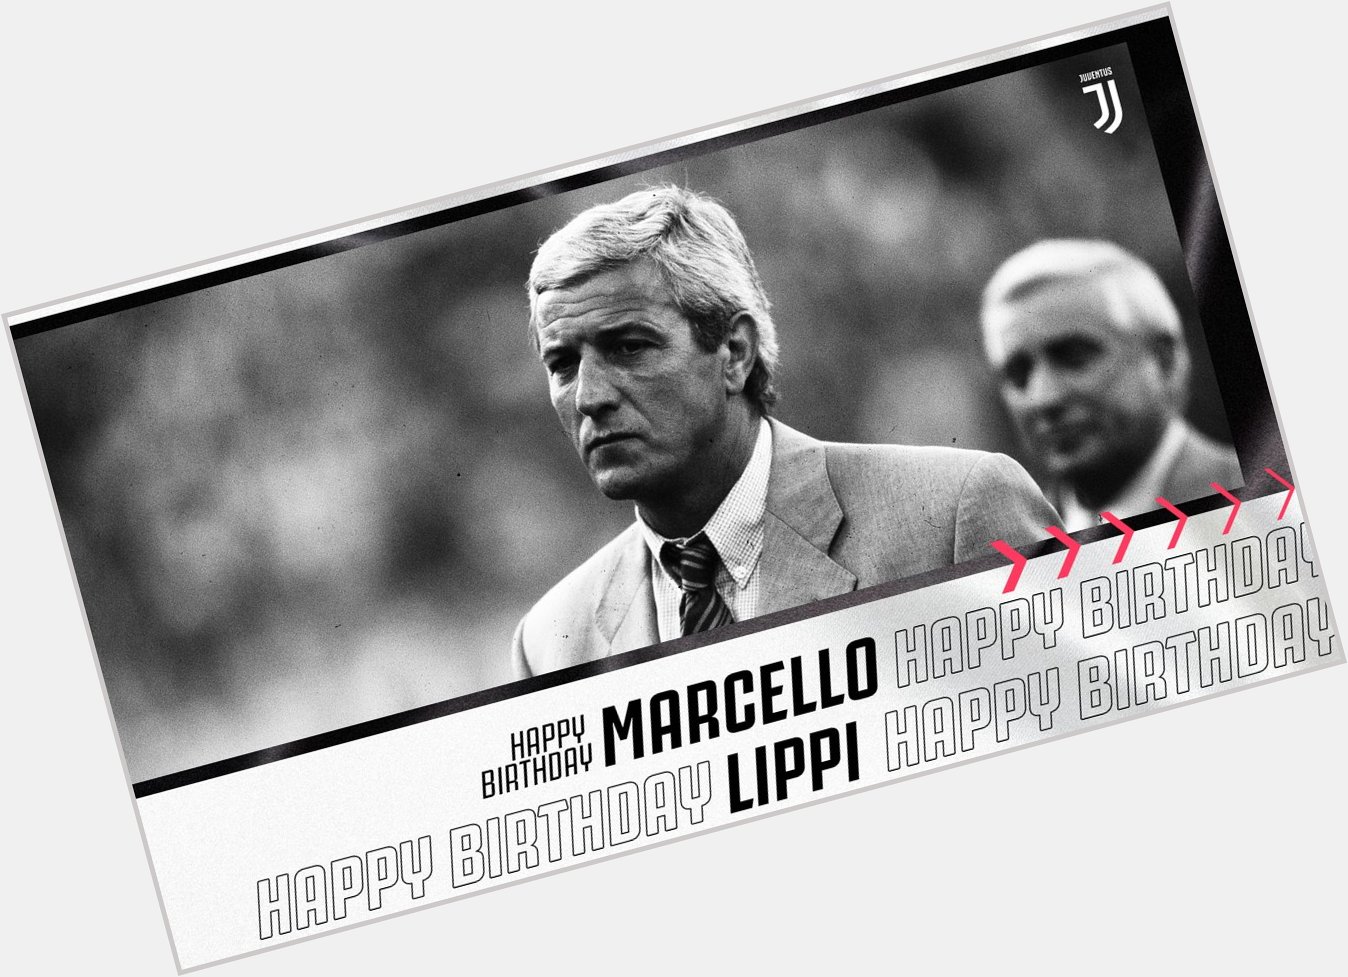 Happy birthday to the one and only, Marcello Lippi!   